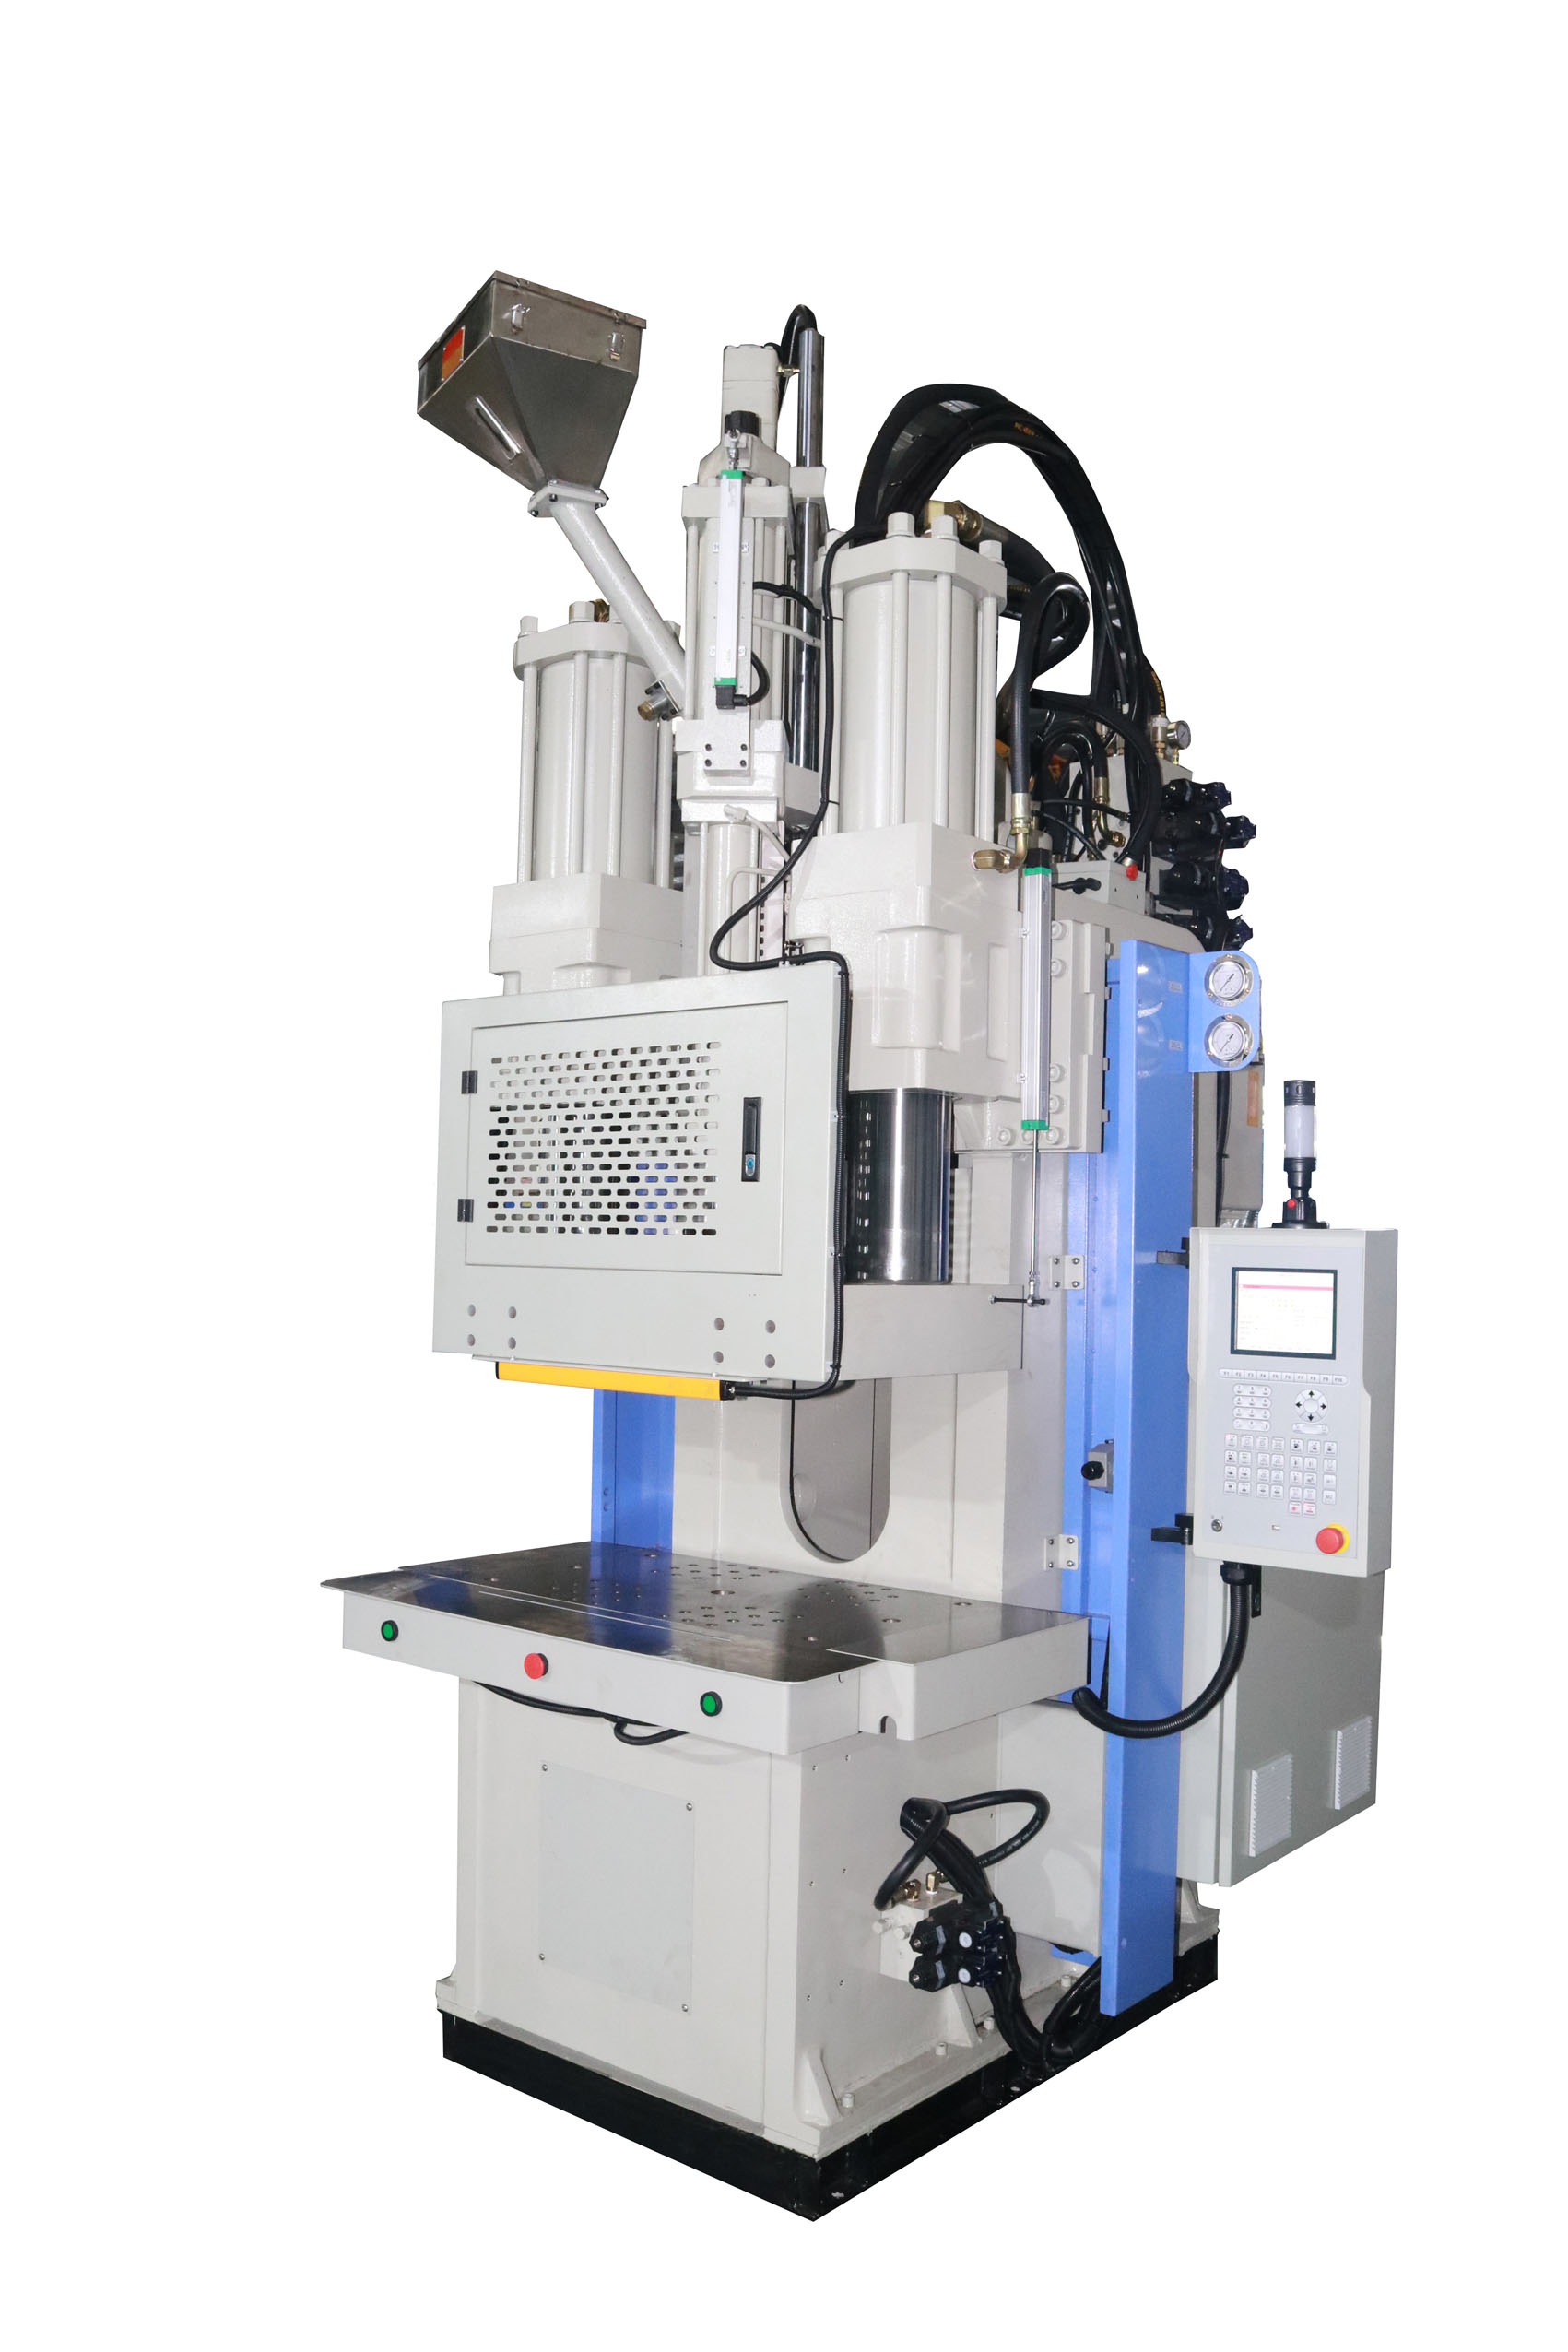 TYC-850 vertical injection molding machine